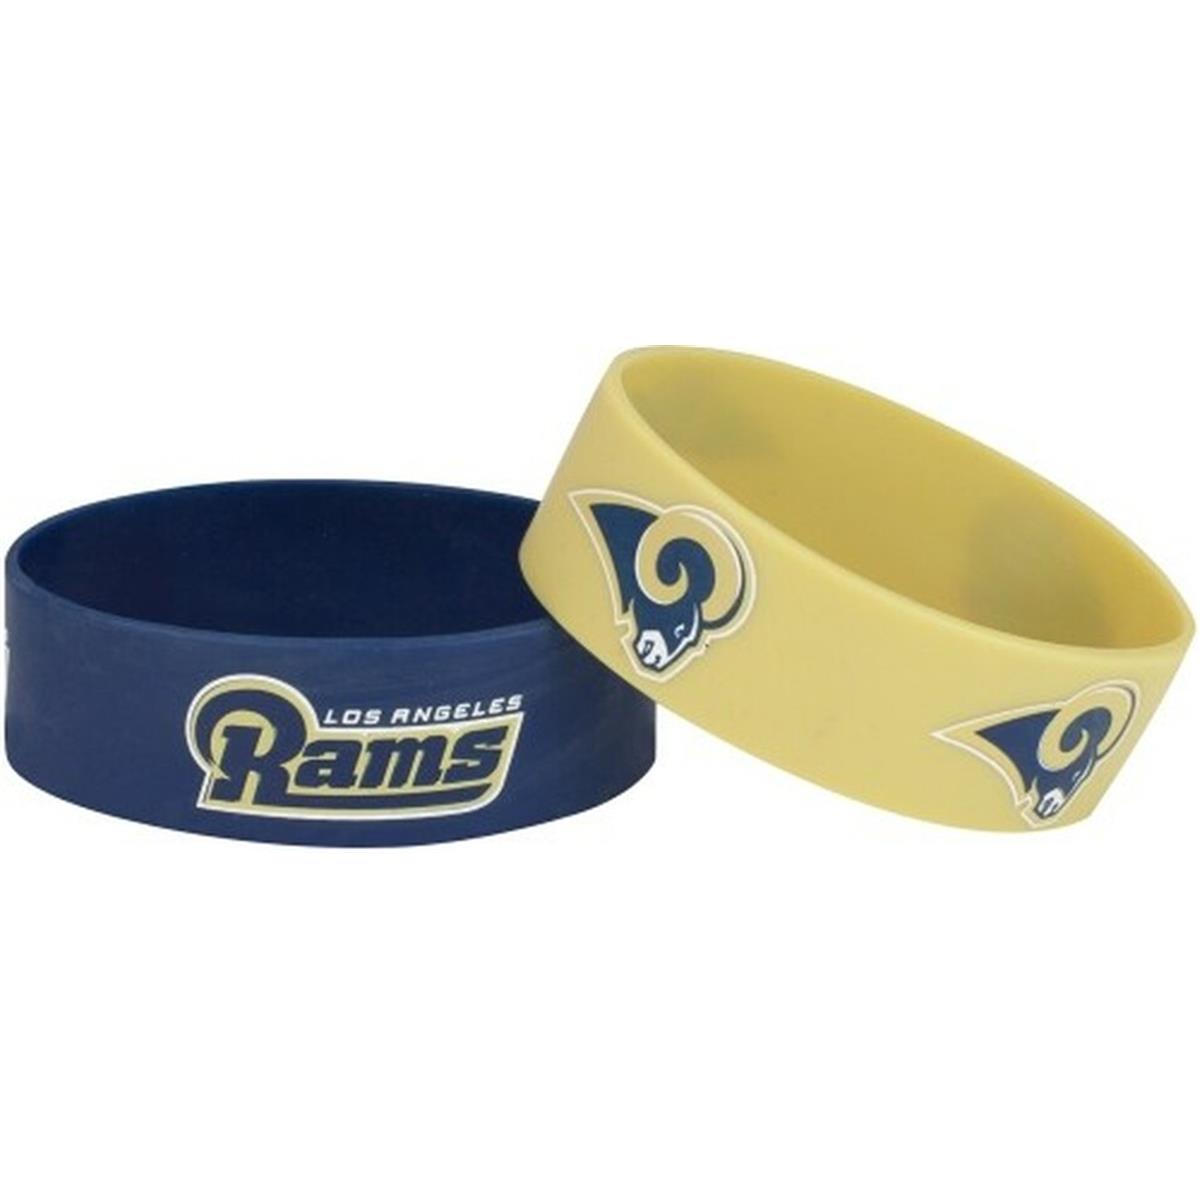 Picture of Amo 6326400573 Los Angeles Rams Bracelets, Pack of 2